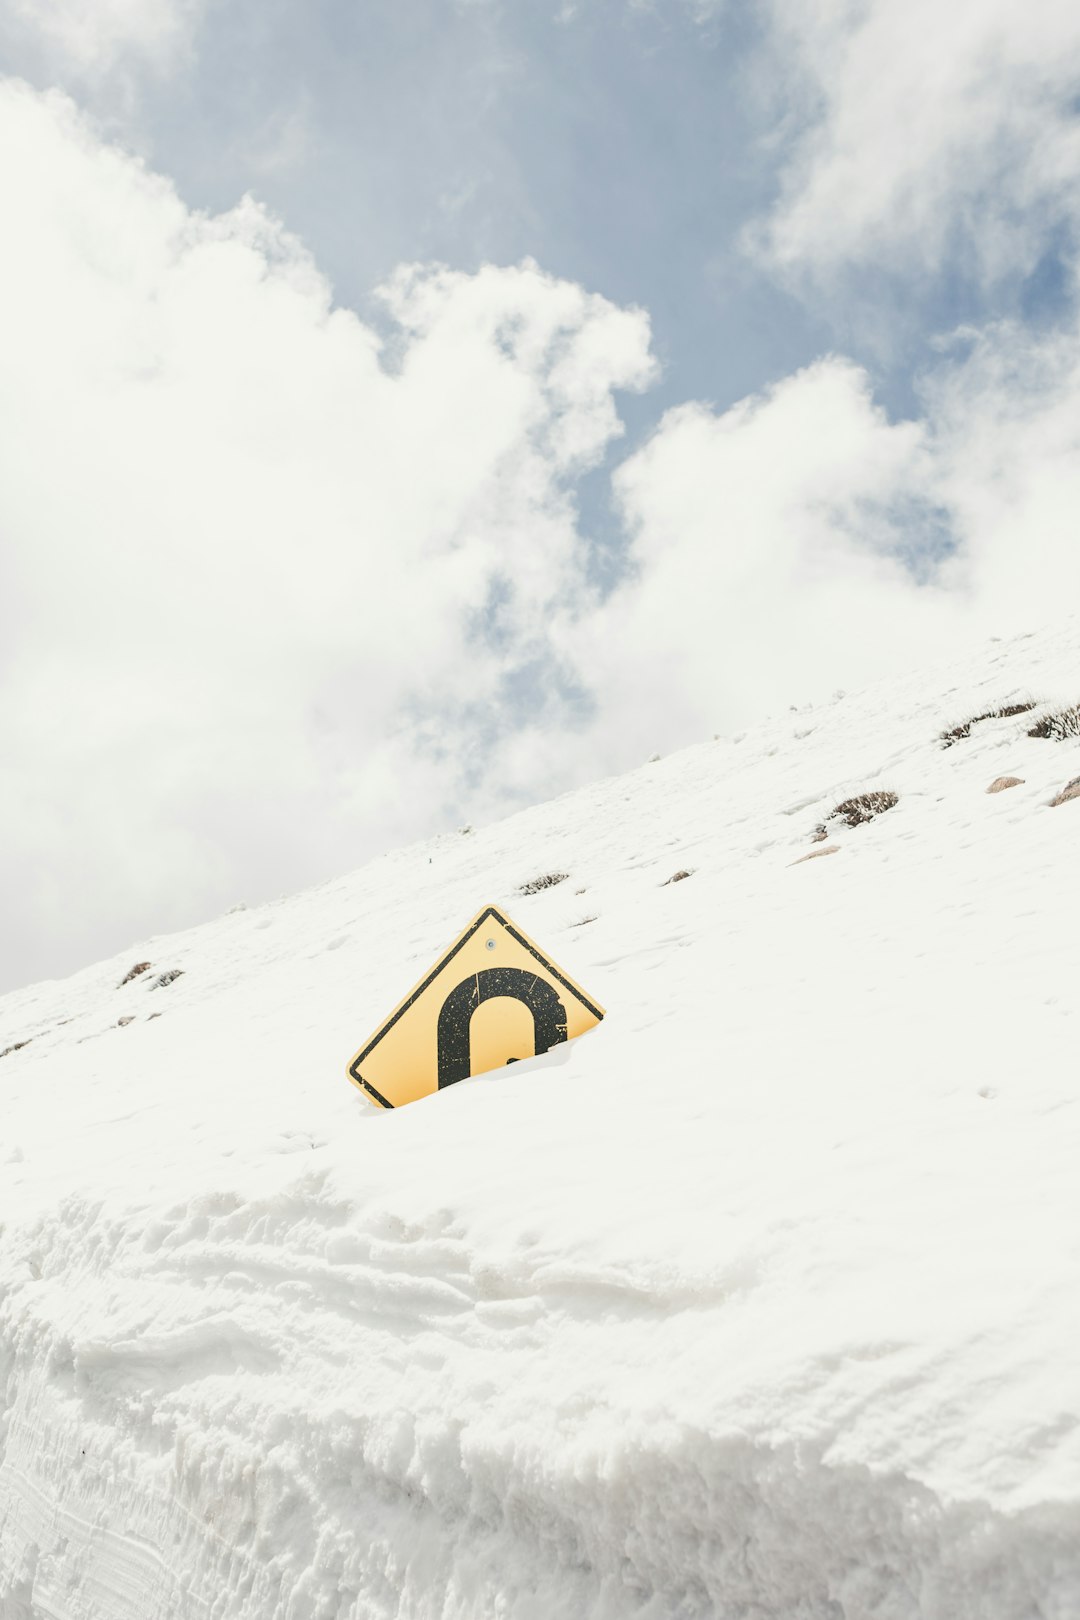 diamond-shaped yellow and blue signage covered by snow